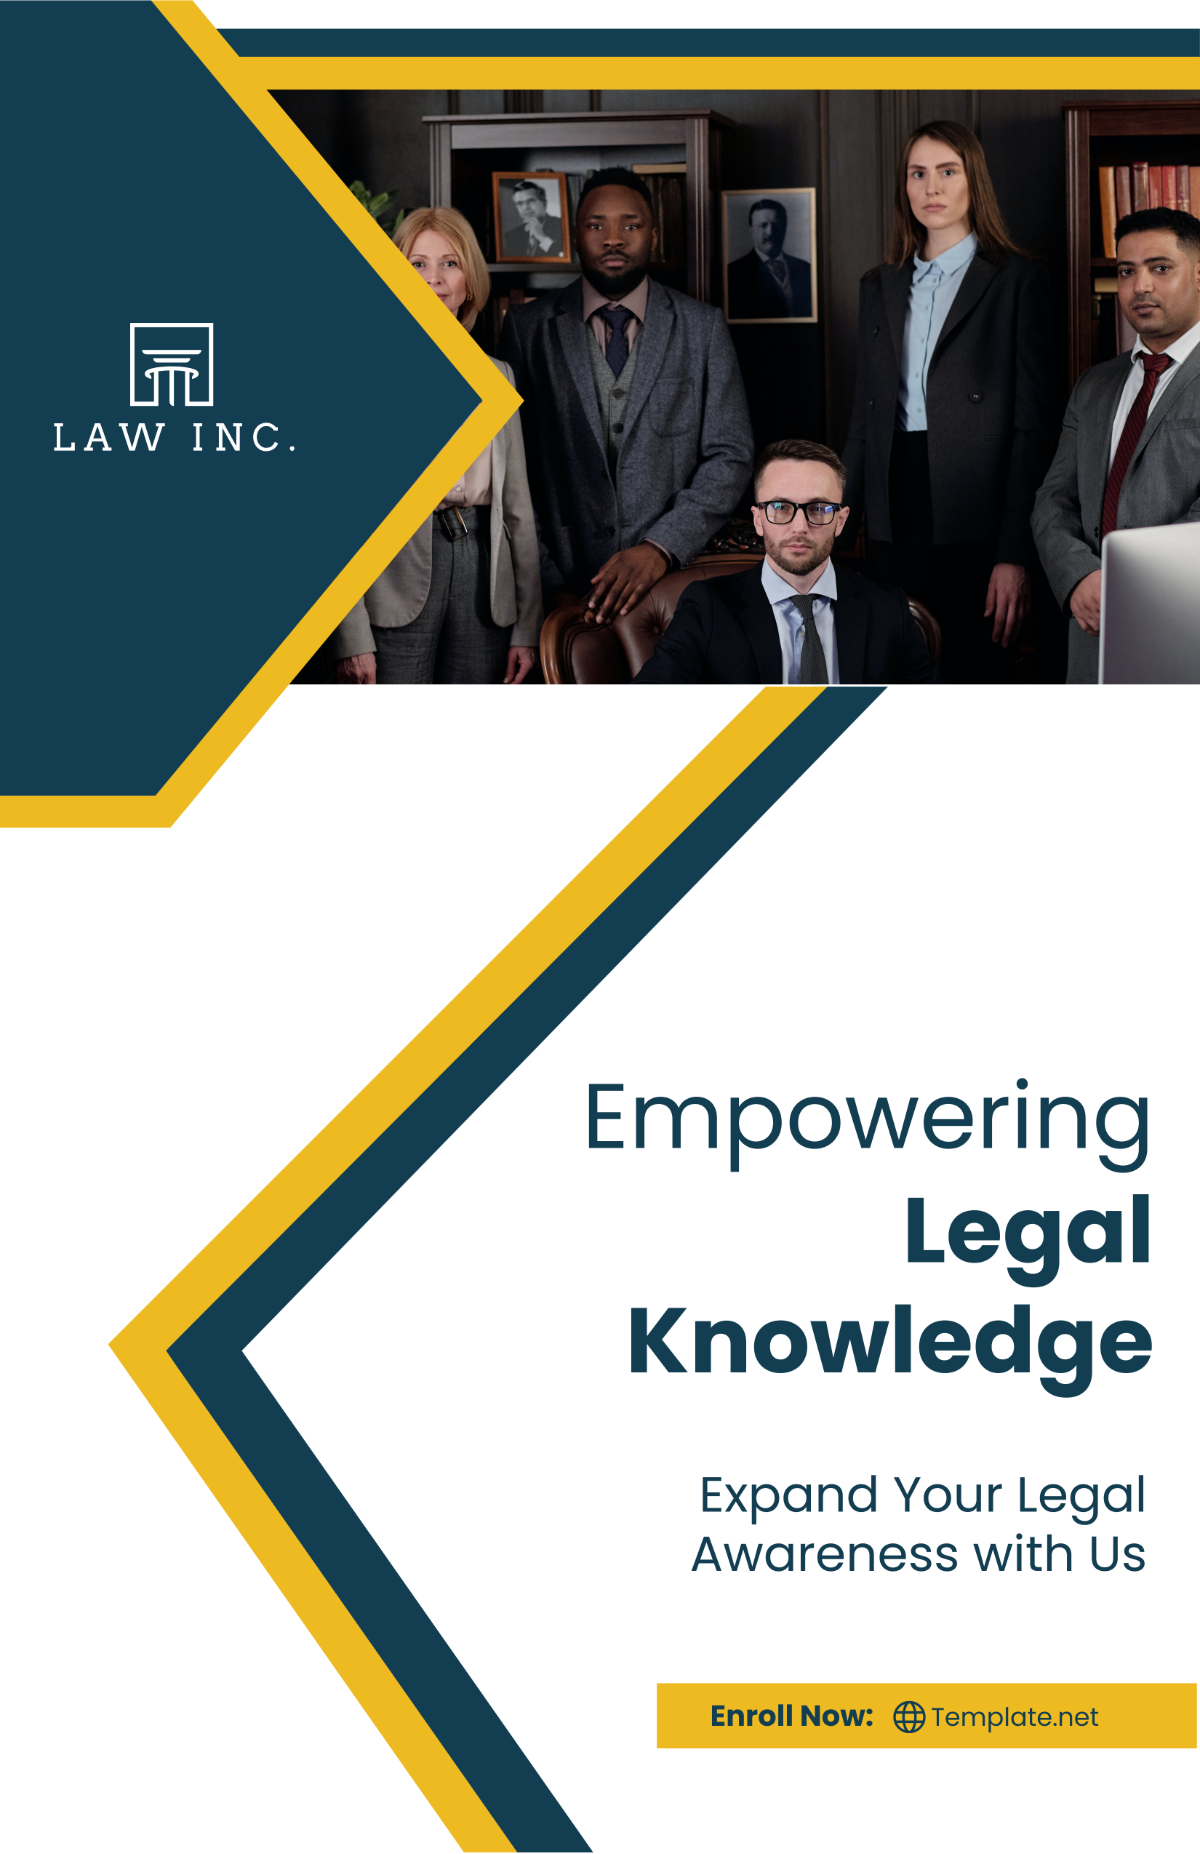 Law Firm Legal Awareness Poster Template